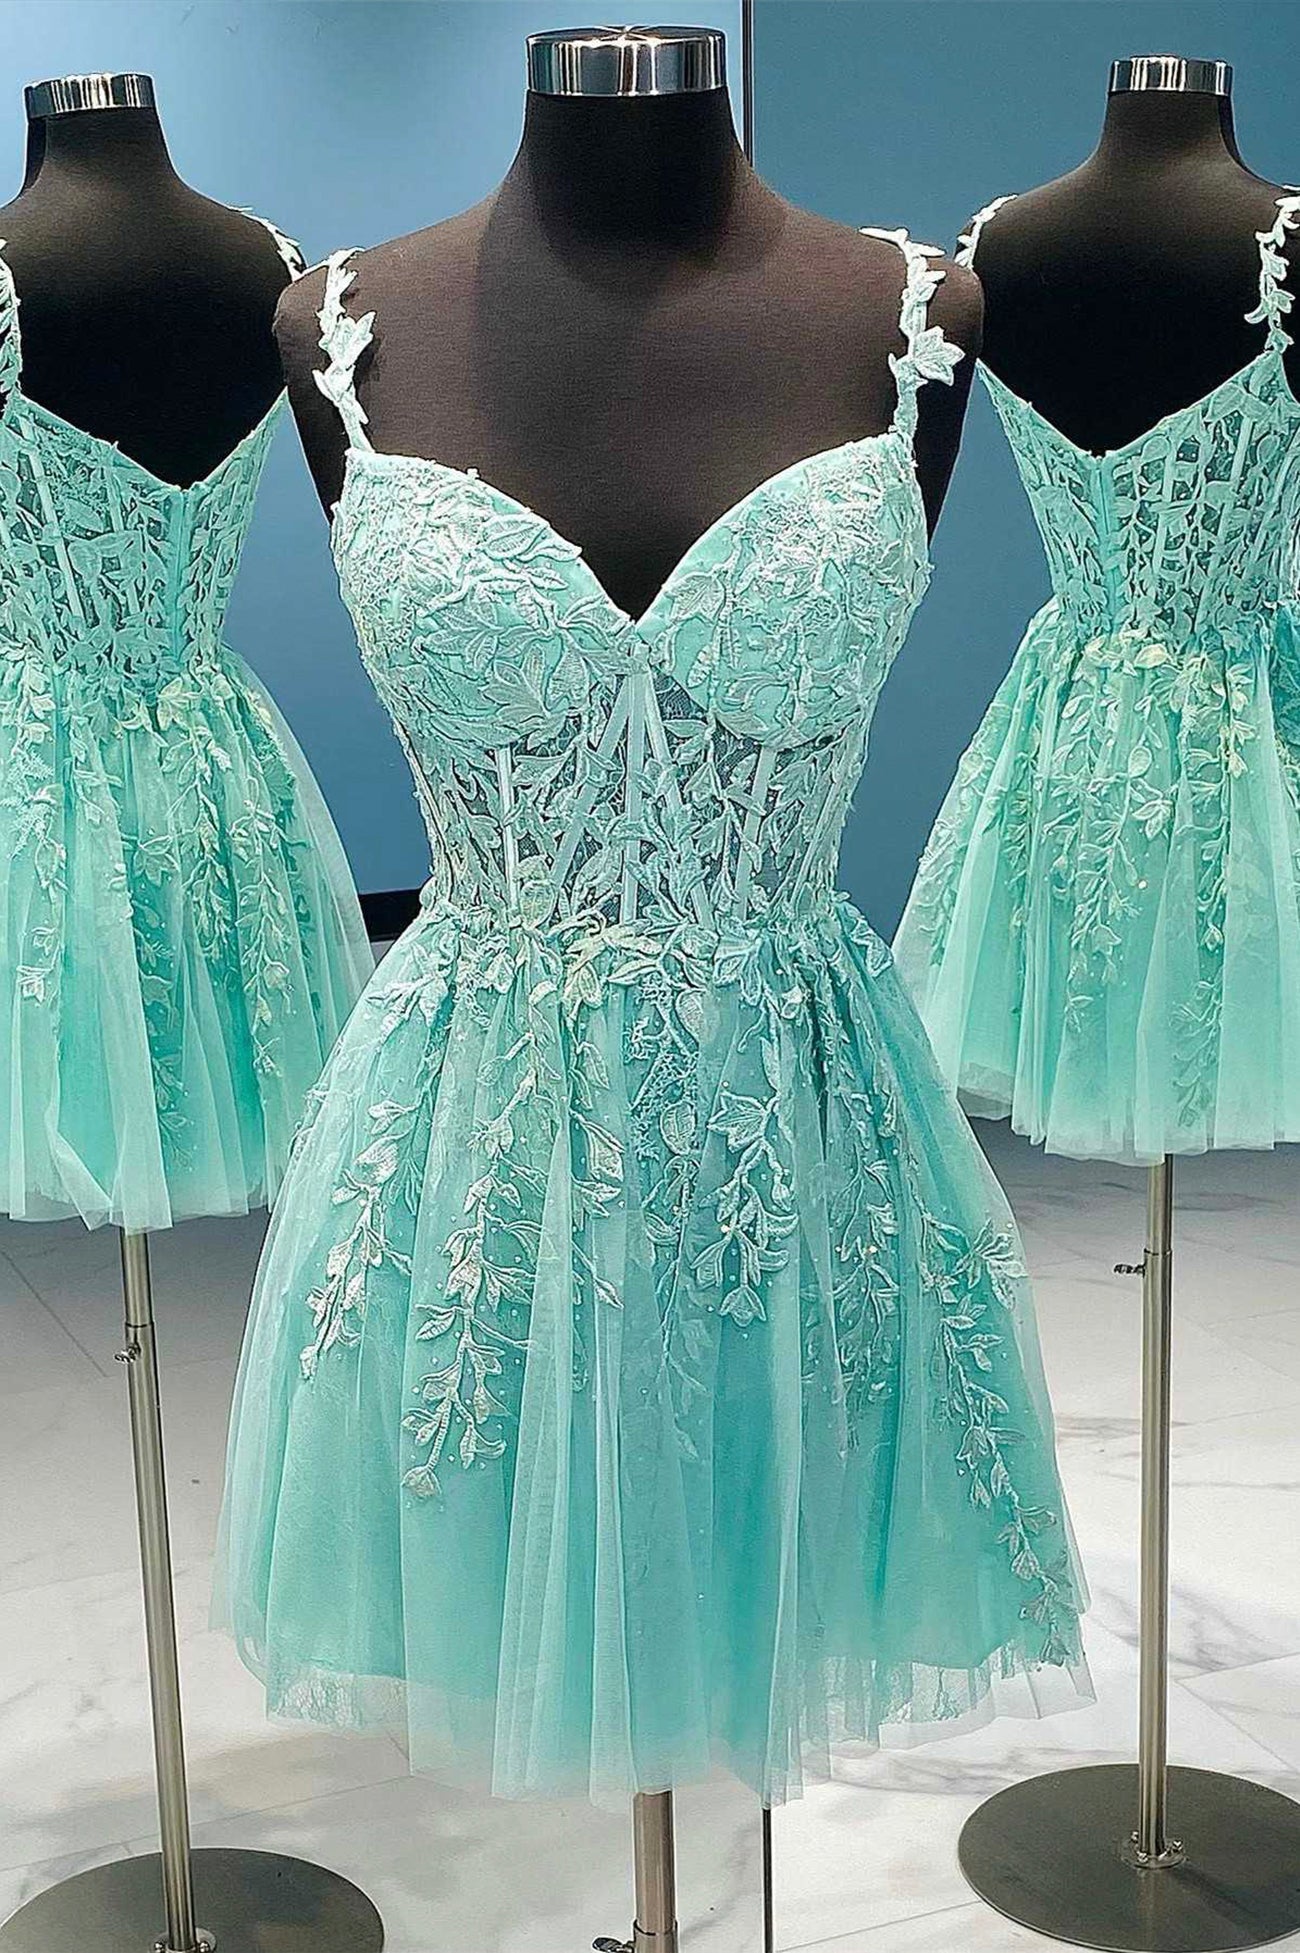 A-Line Tulle Lace Short Corset Prom Dress, Cute Spaghetti Strap Party Dress Outfits, Dream